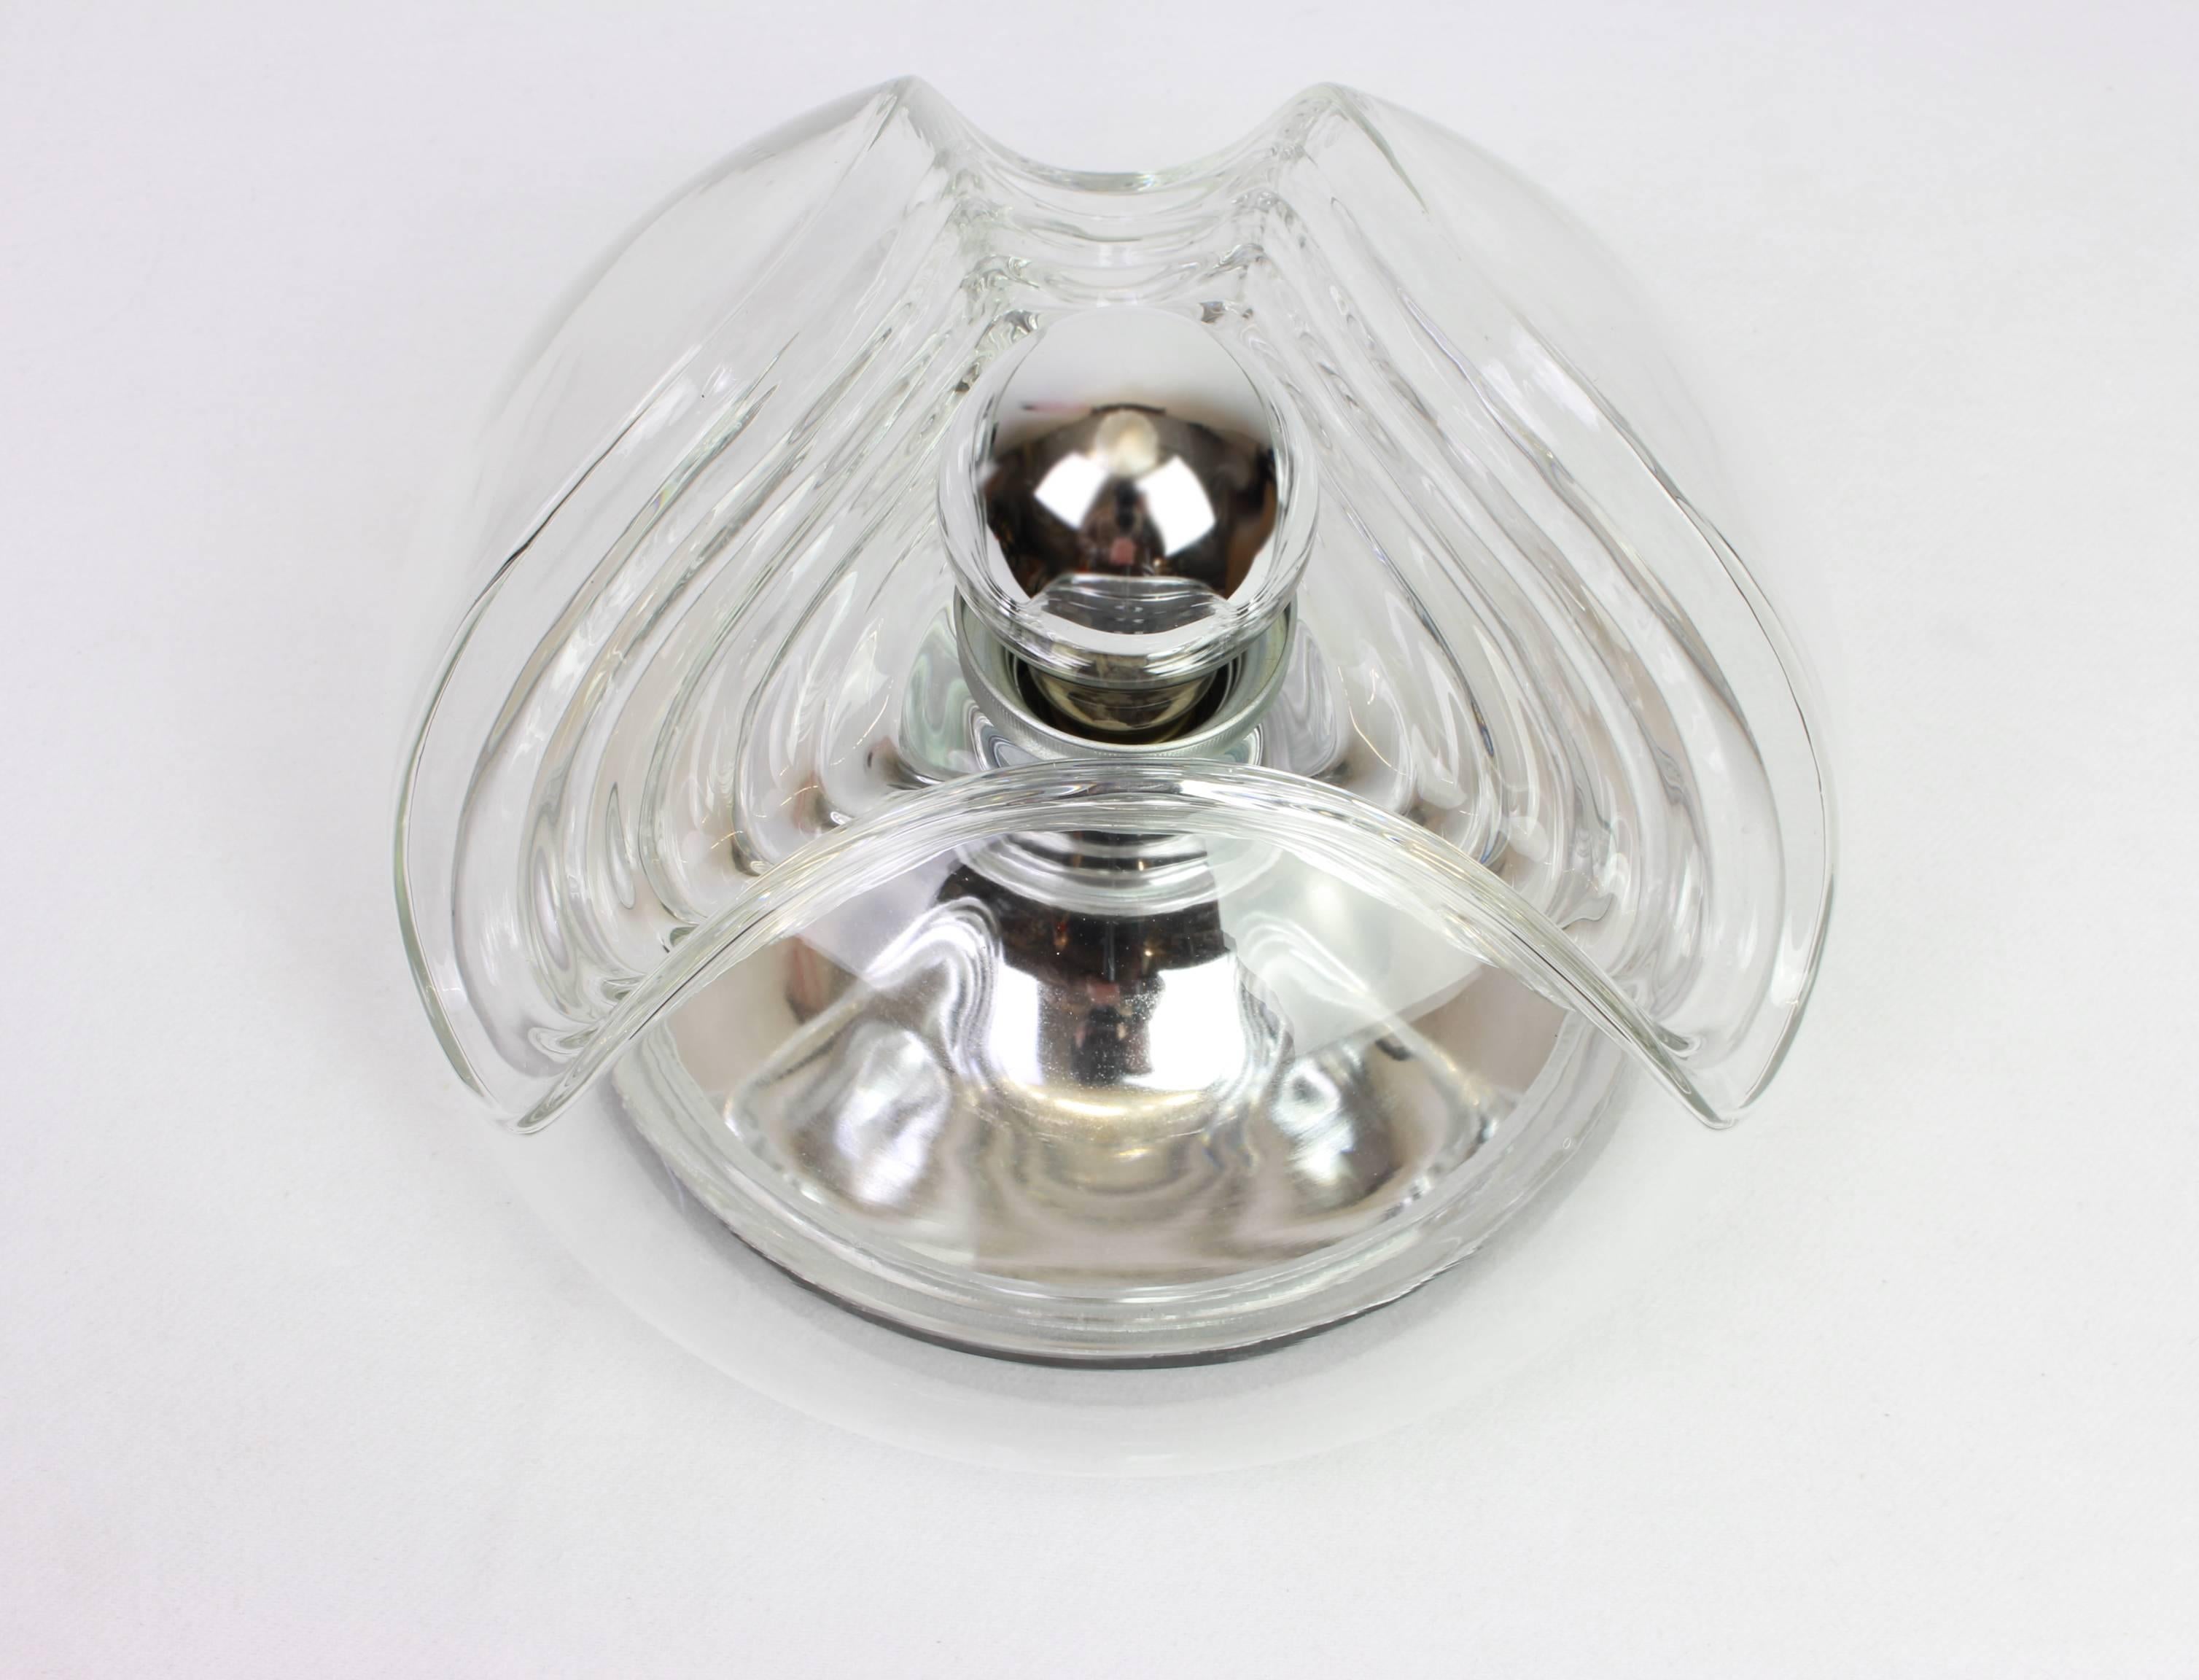 A special round biomorphic clear glass wall sconce or flushmount designed by Koch & Lowy for Peill & Putzler, manufactured in Germany, circa 1970s.

High quality and in very good condition. Cleaned, well-wired and ready to use. 

Each fixture